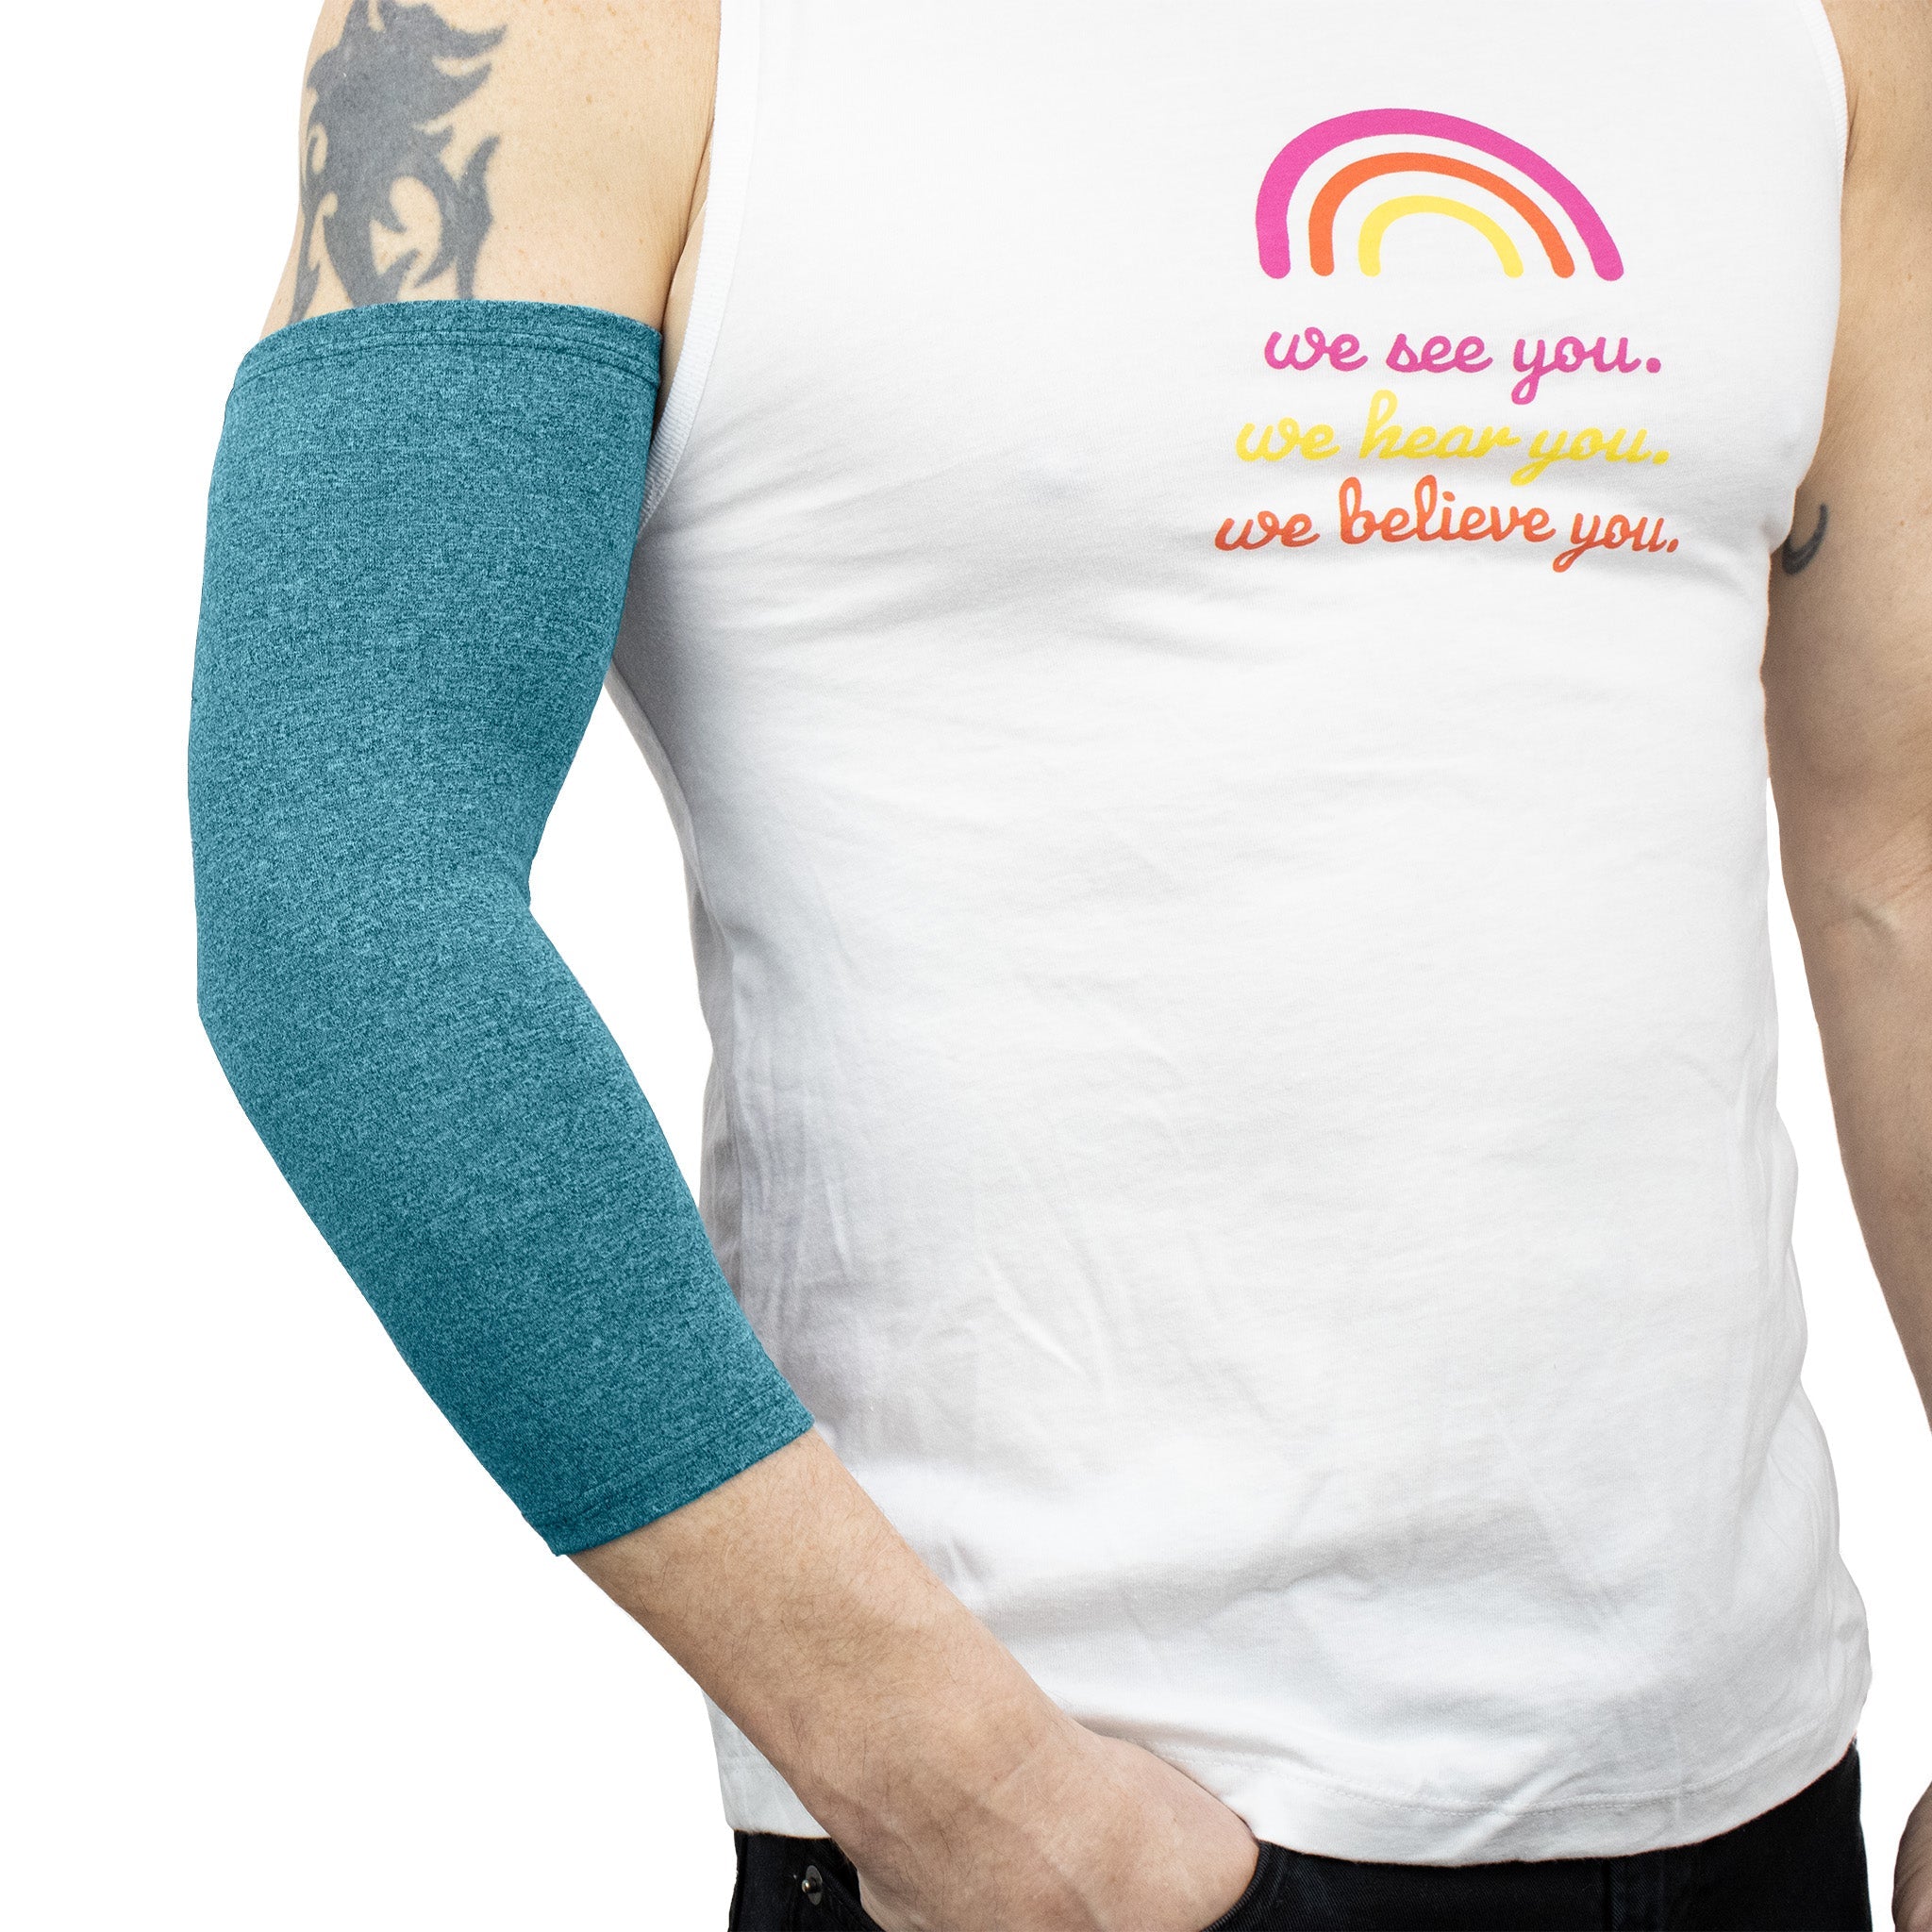 2-Pack Unisex Heathered Ultra Support Sleeve